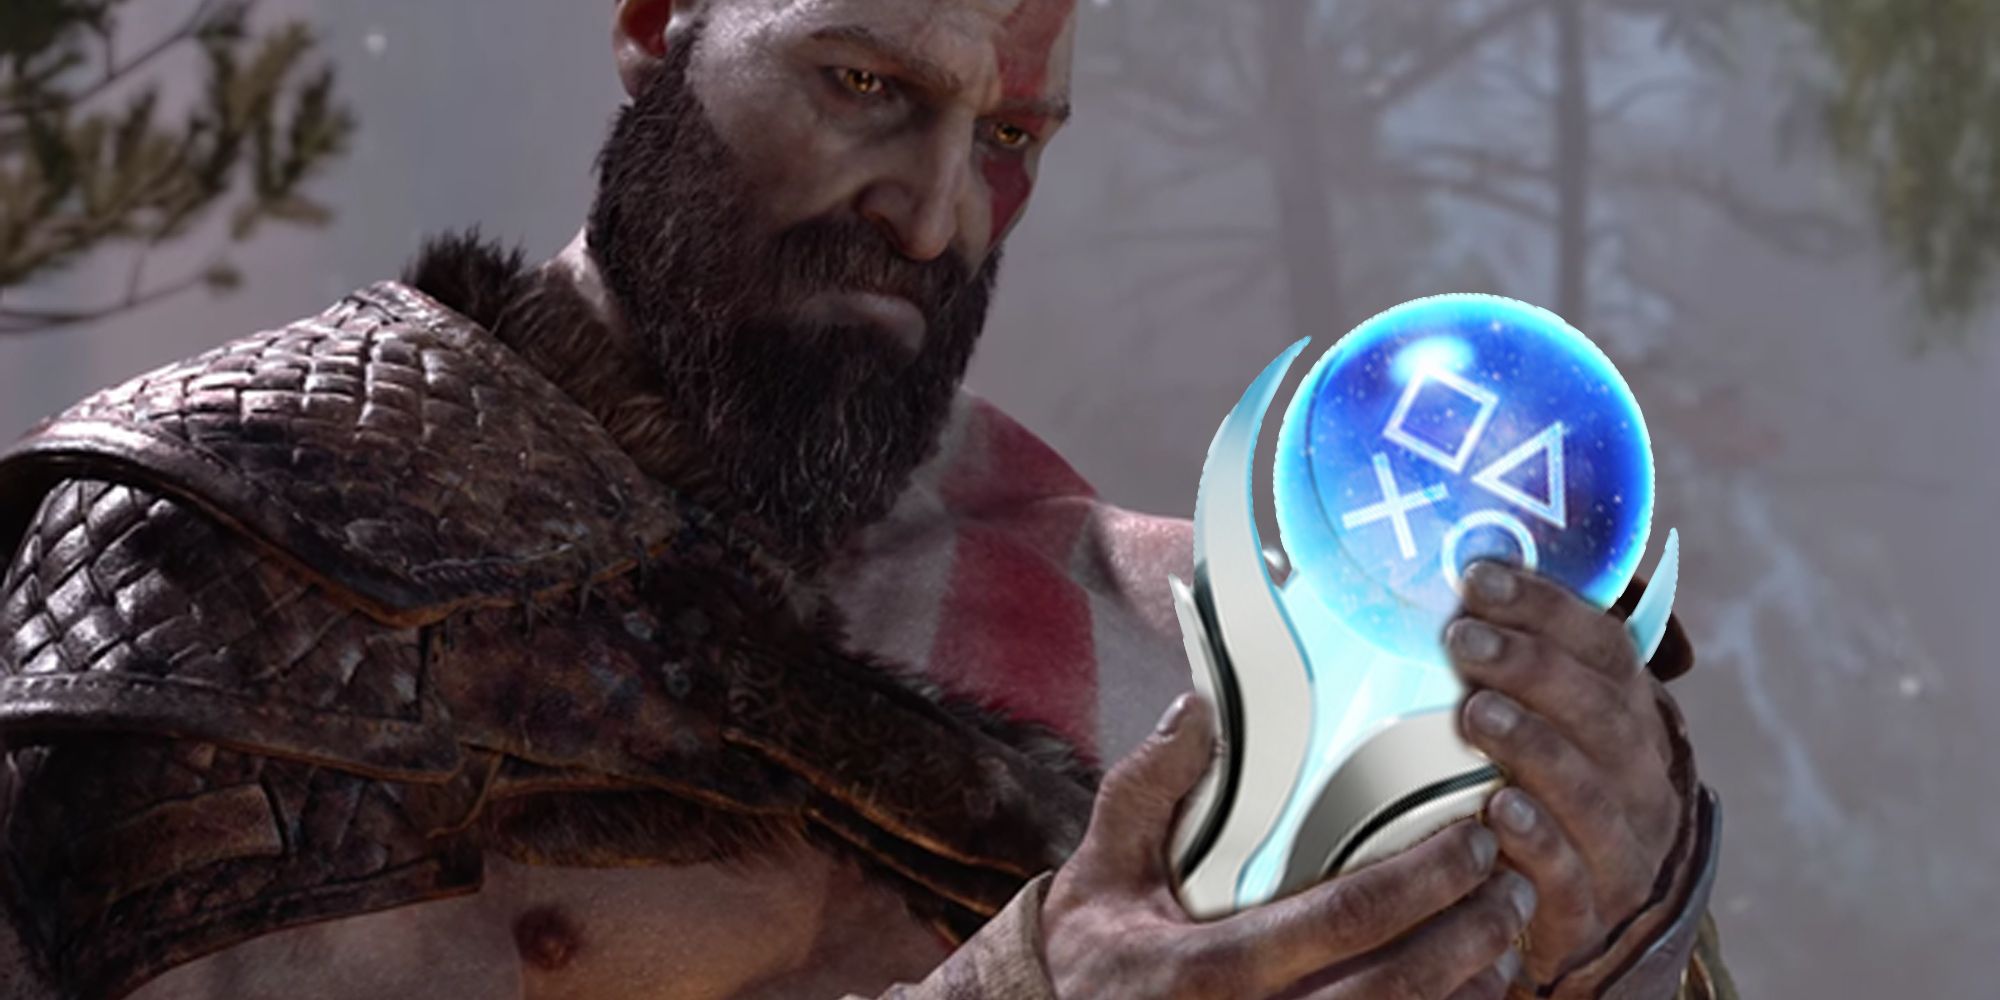 GOTY Contender God of War Ragnarok Proves Its Dominance Ahead of The Game  Awards 2022 - EssentiallySports